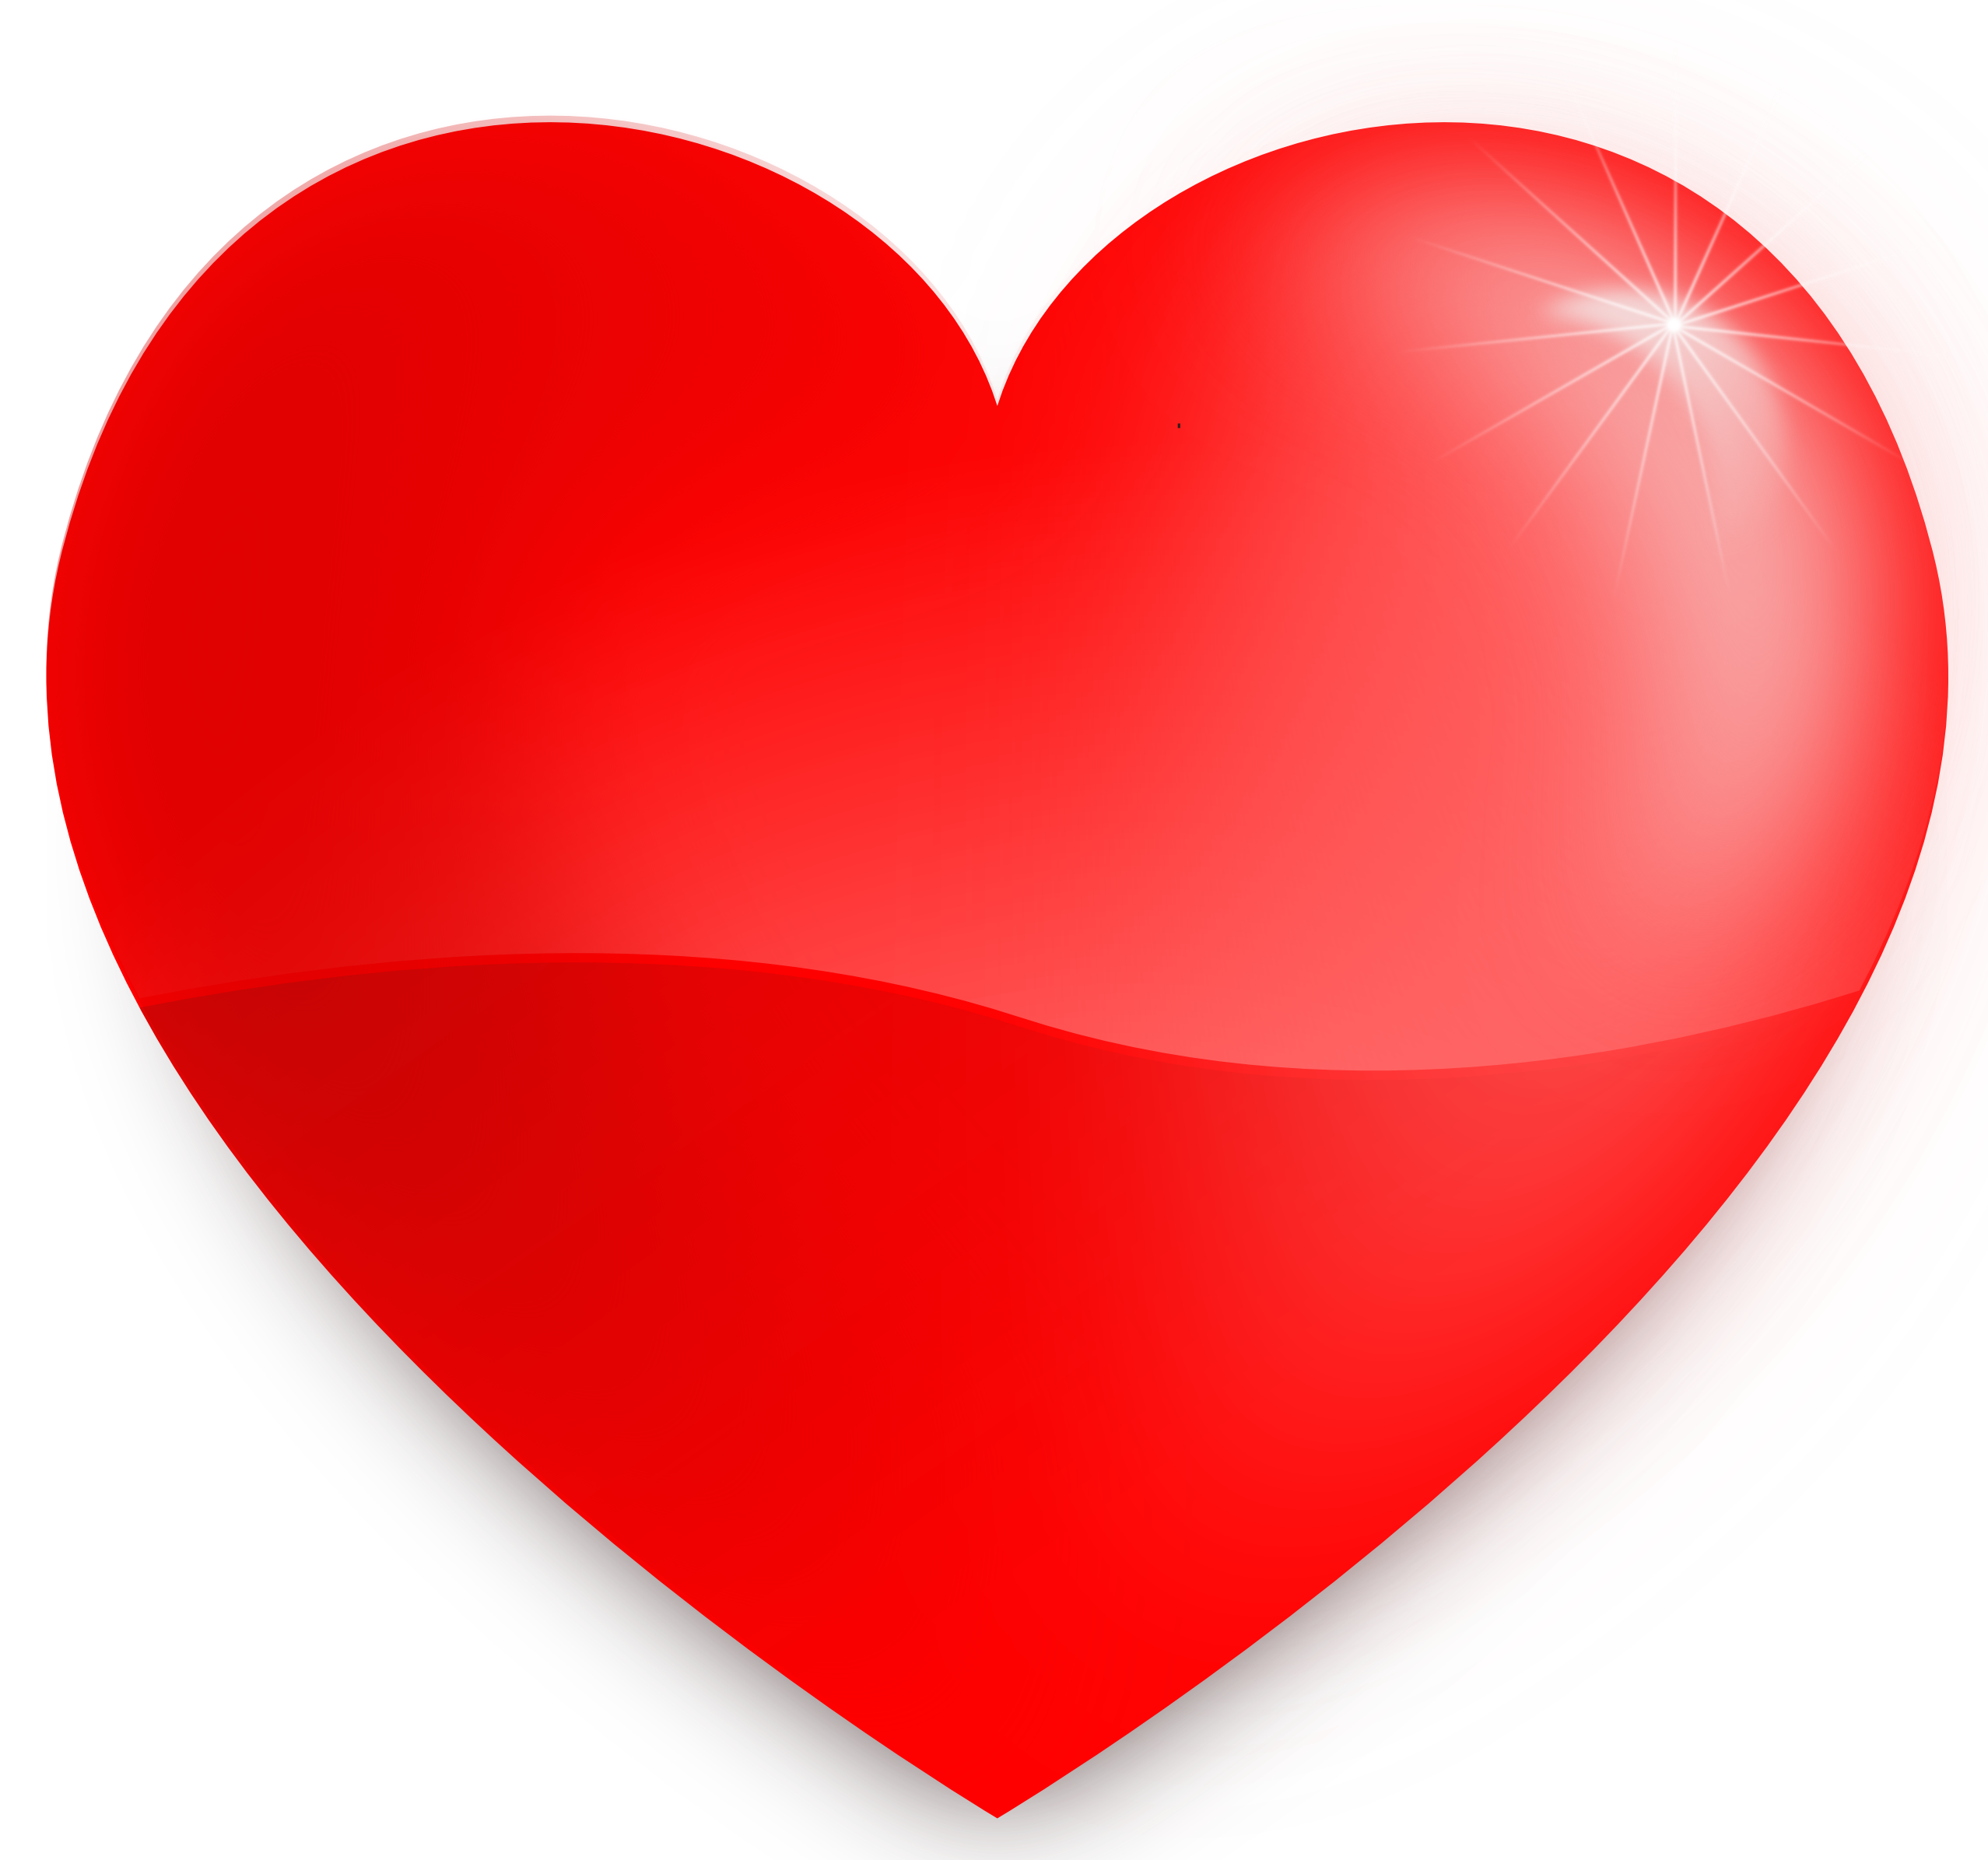 Red Heart PNG Image - PurePNG | Free transparent CC0 PNG ...